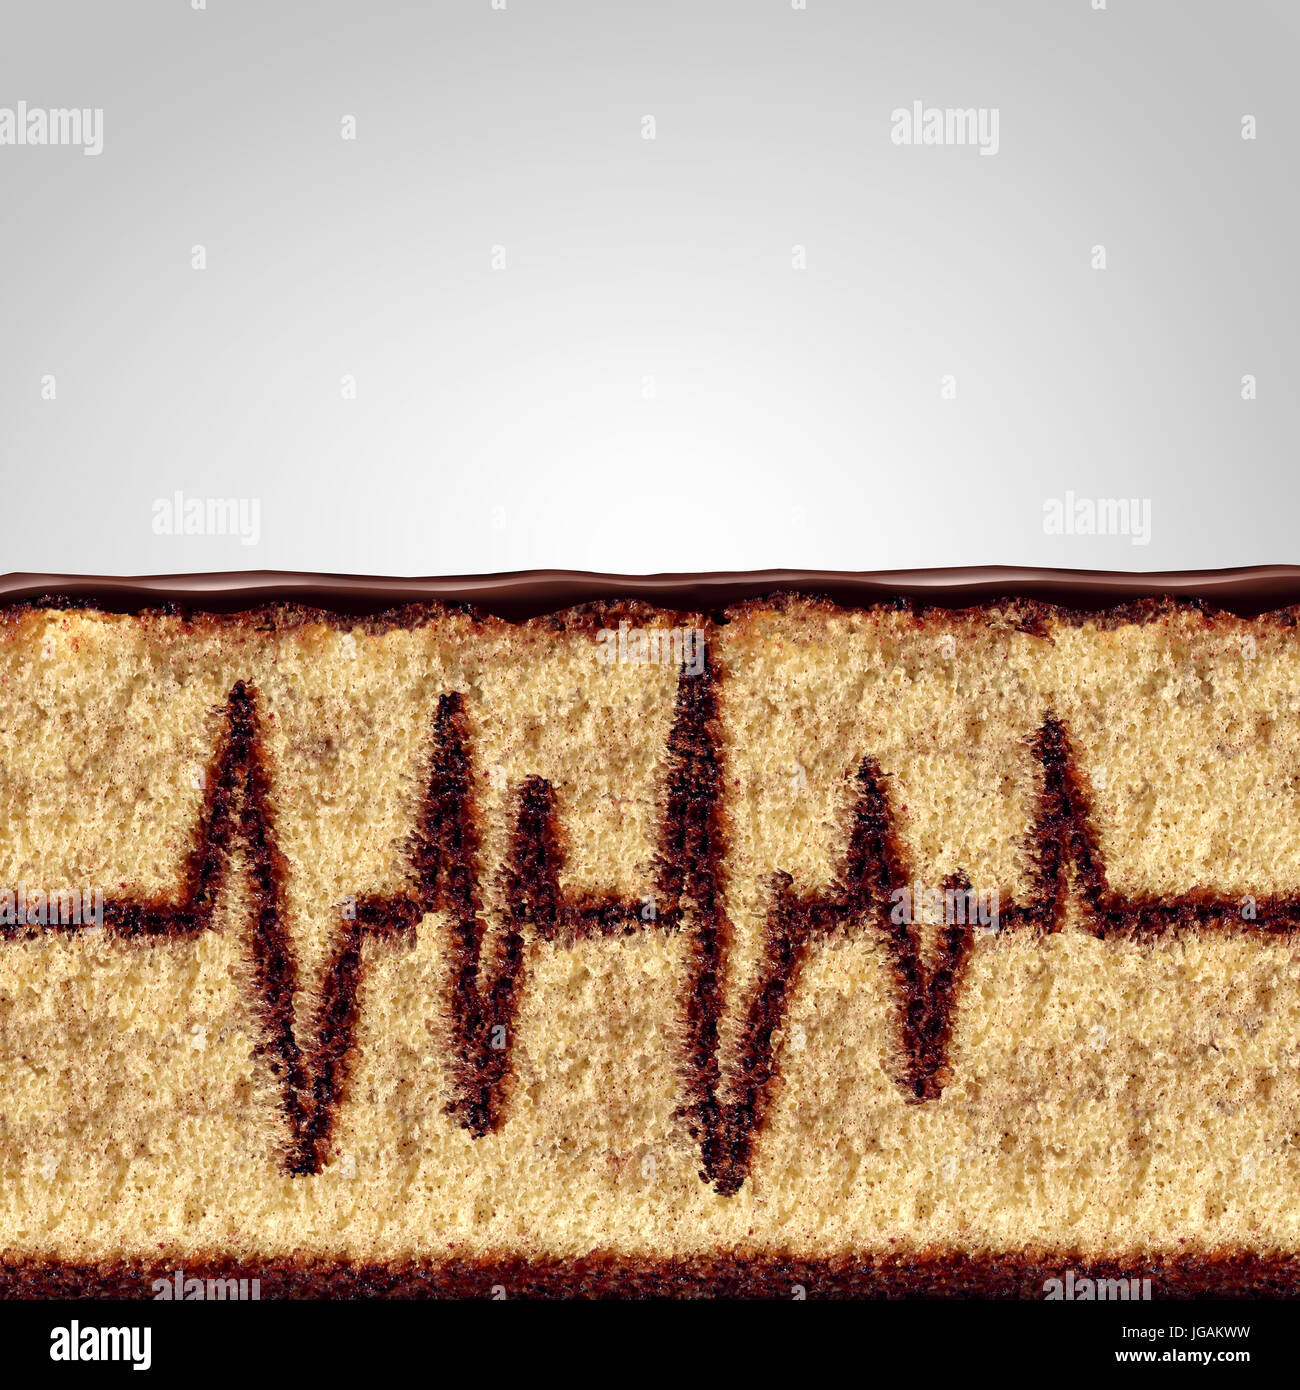 Eating and health concept as a cake with the filling shaped as an ekg or ecg monitor pattern as a medical or medicine risk symbol due to poor diet Stock Photo